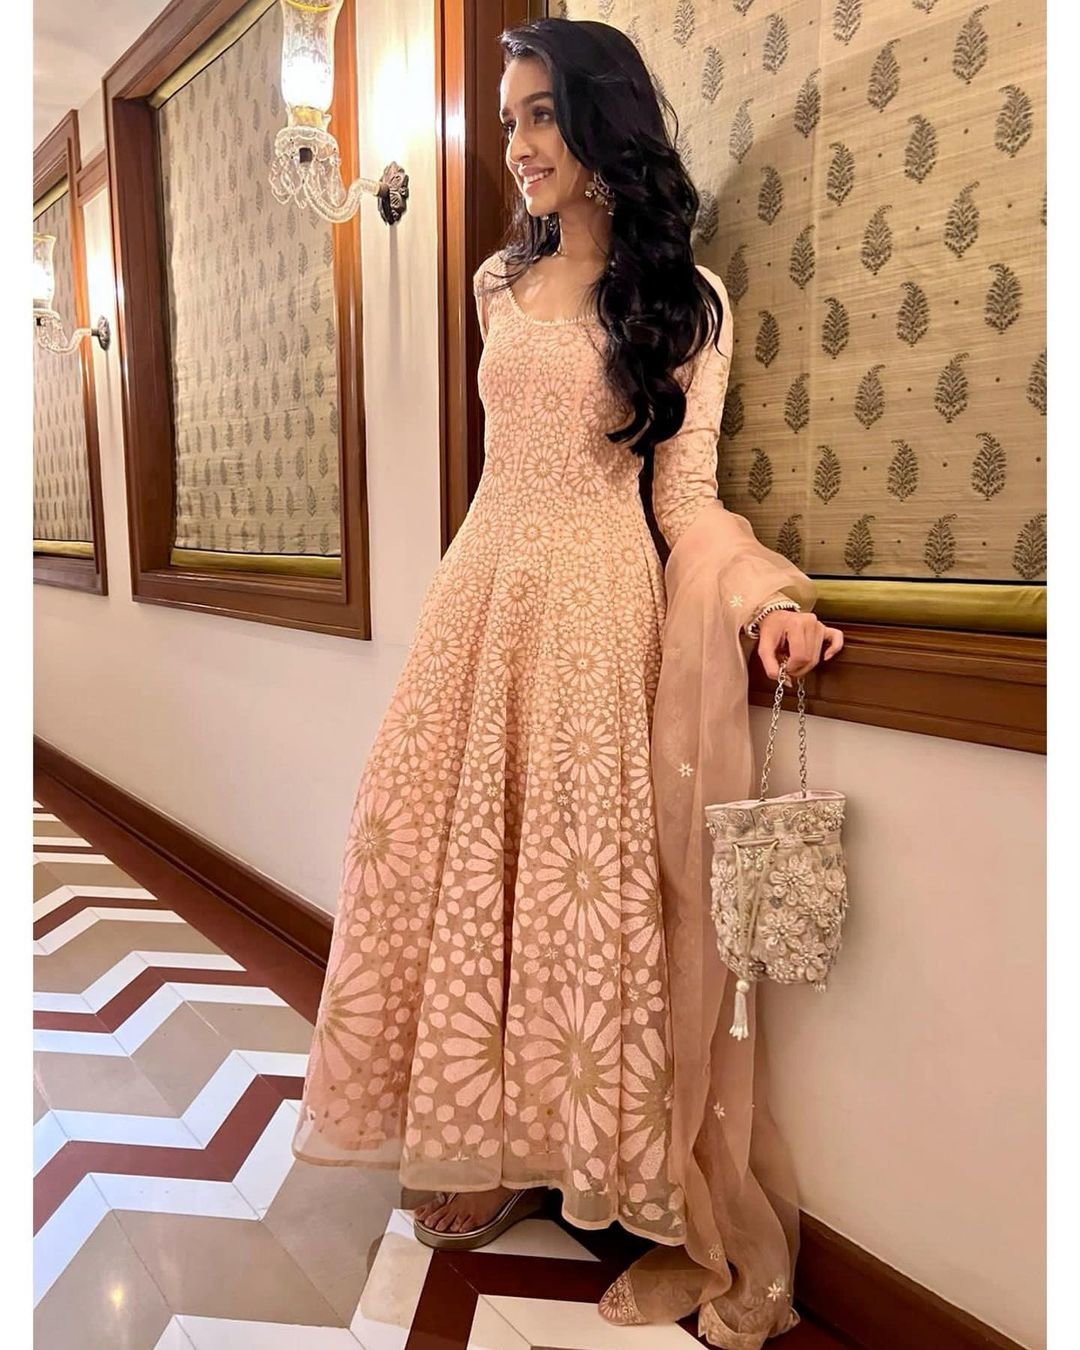 Shraddha Kapoor in Punit Balana for Stree promotions – South India Fashion